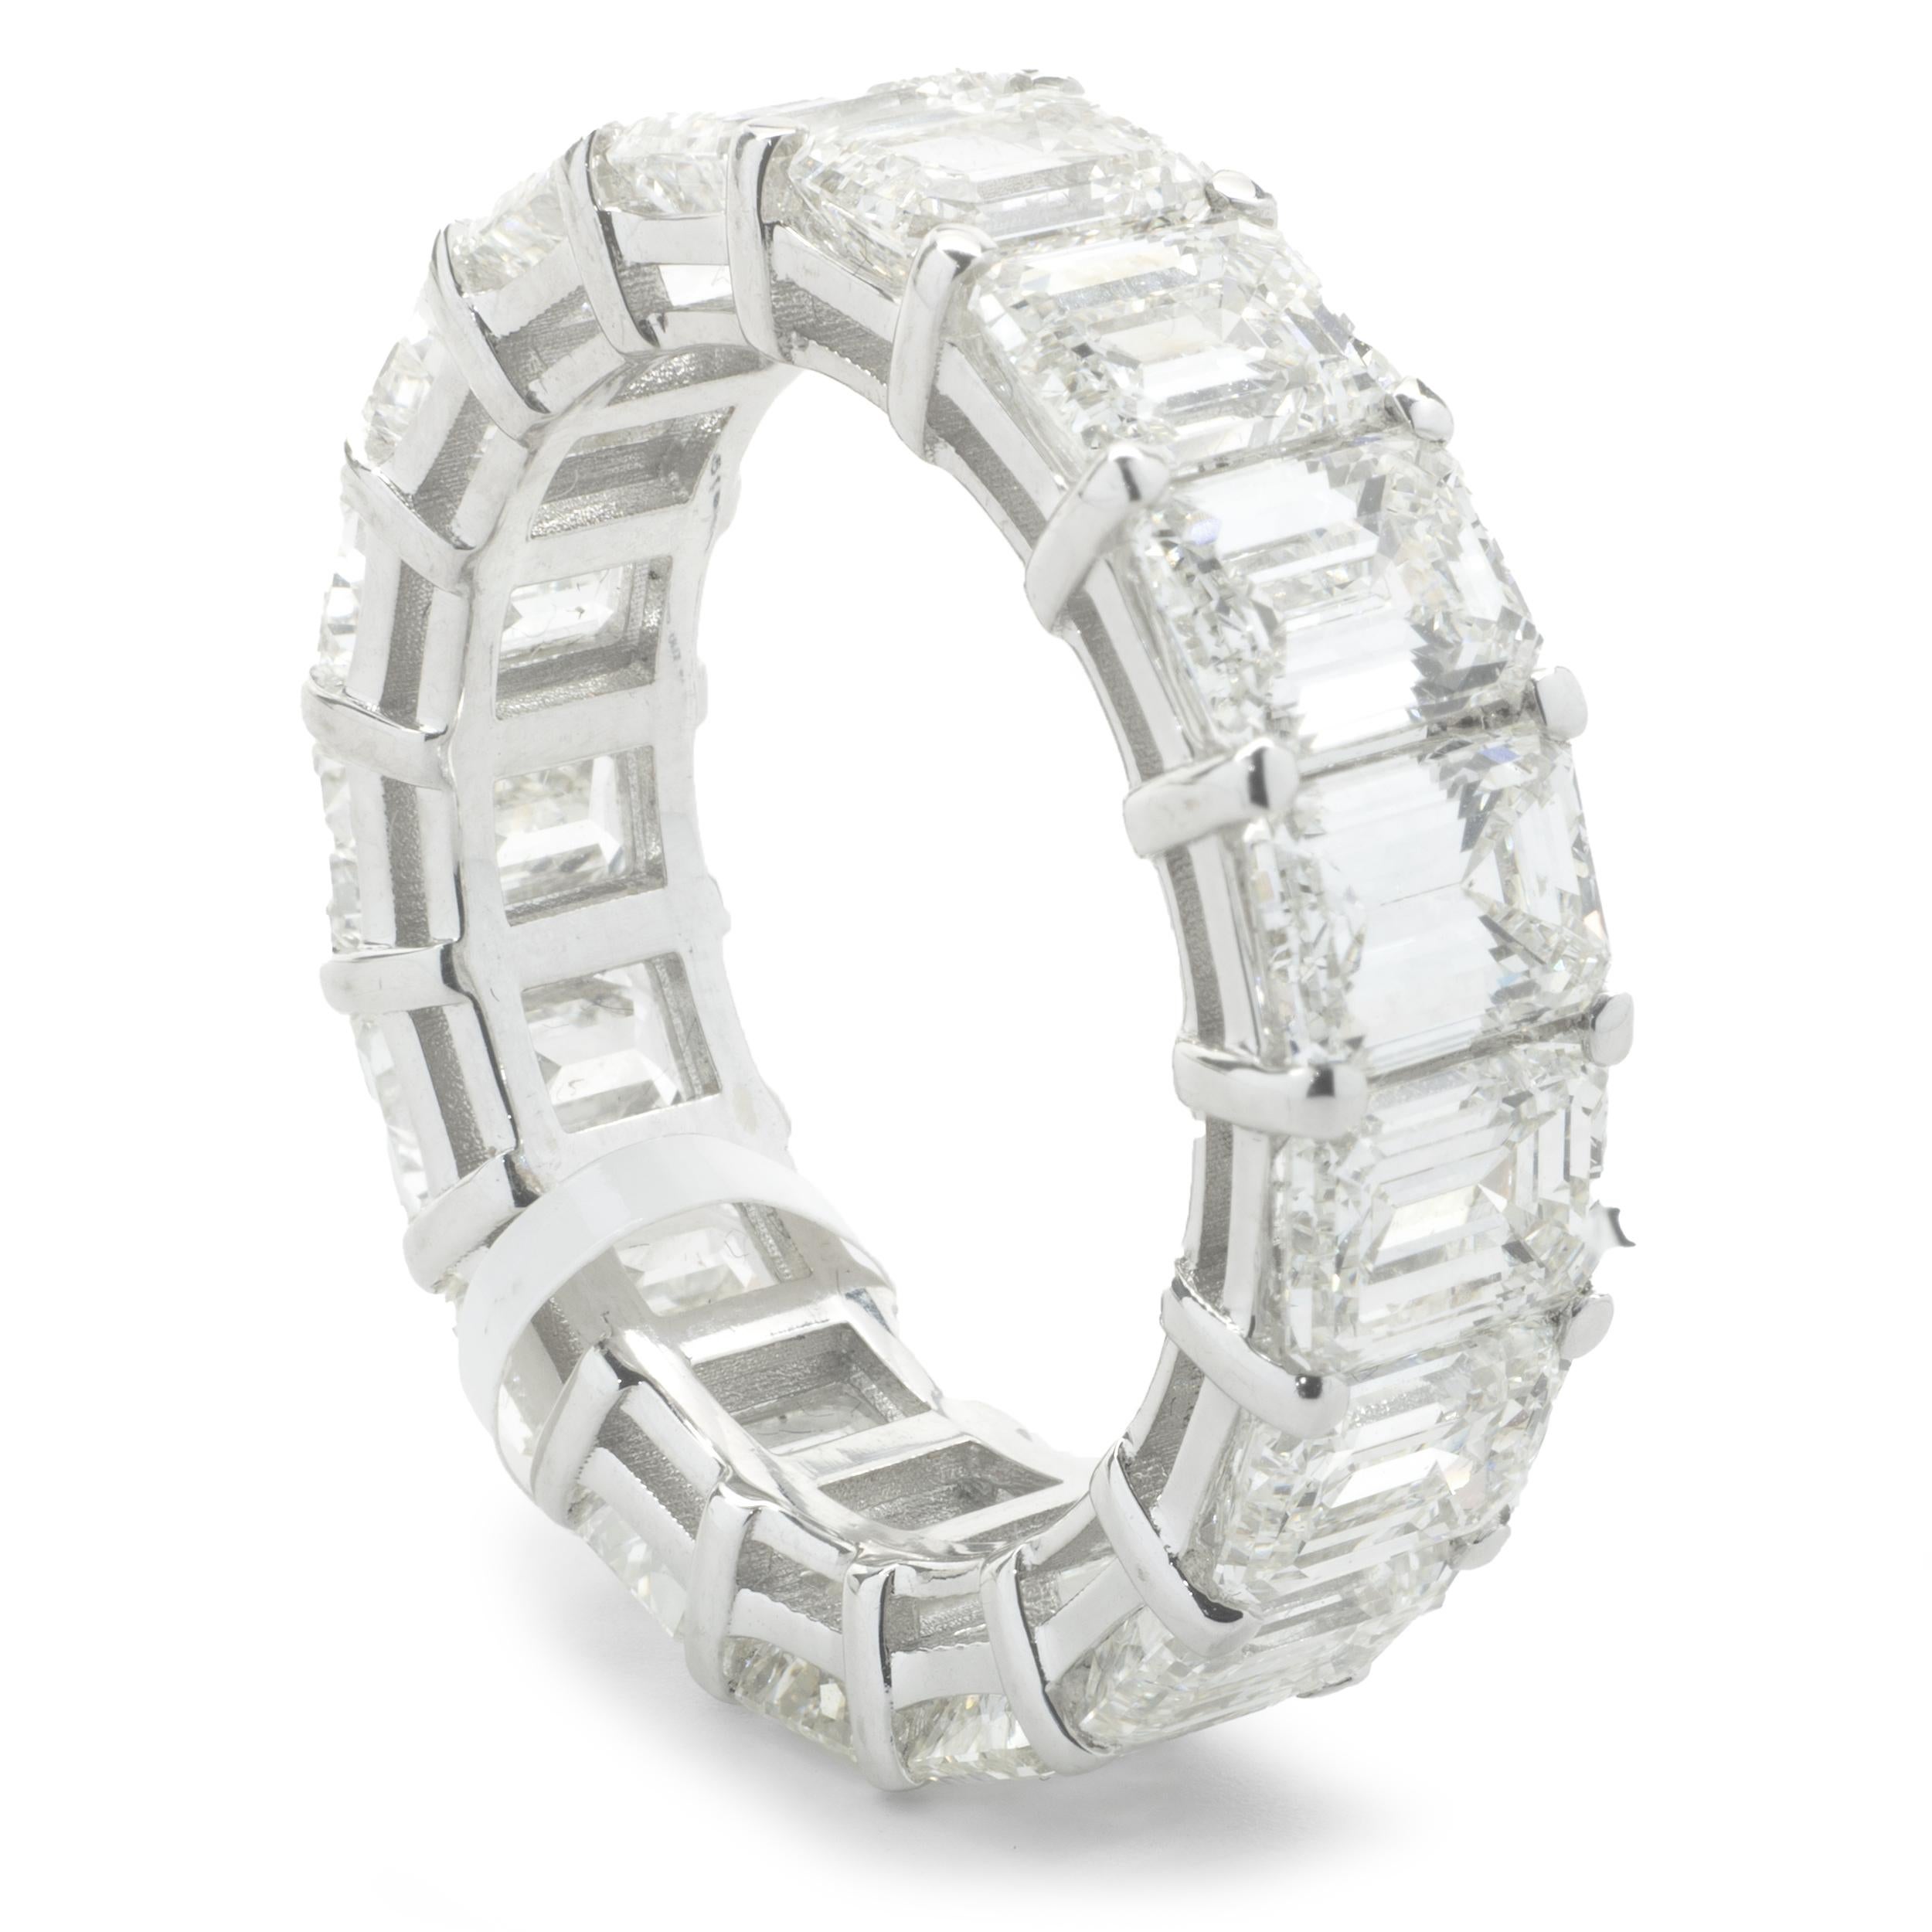 Designer: custom
Material: 14K white gold
Diamond: 17 emerald cut = 8.76cttw
Color: G / H
Clarity: VS1-2
Ring size: 6.25 (please allow two additional shipping days for sizing requests)
Weight:  5.88 grams
